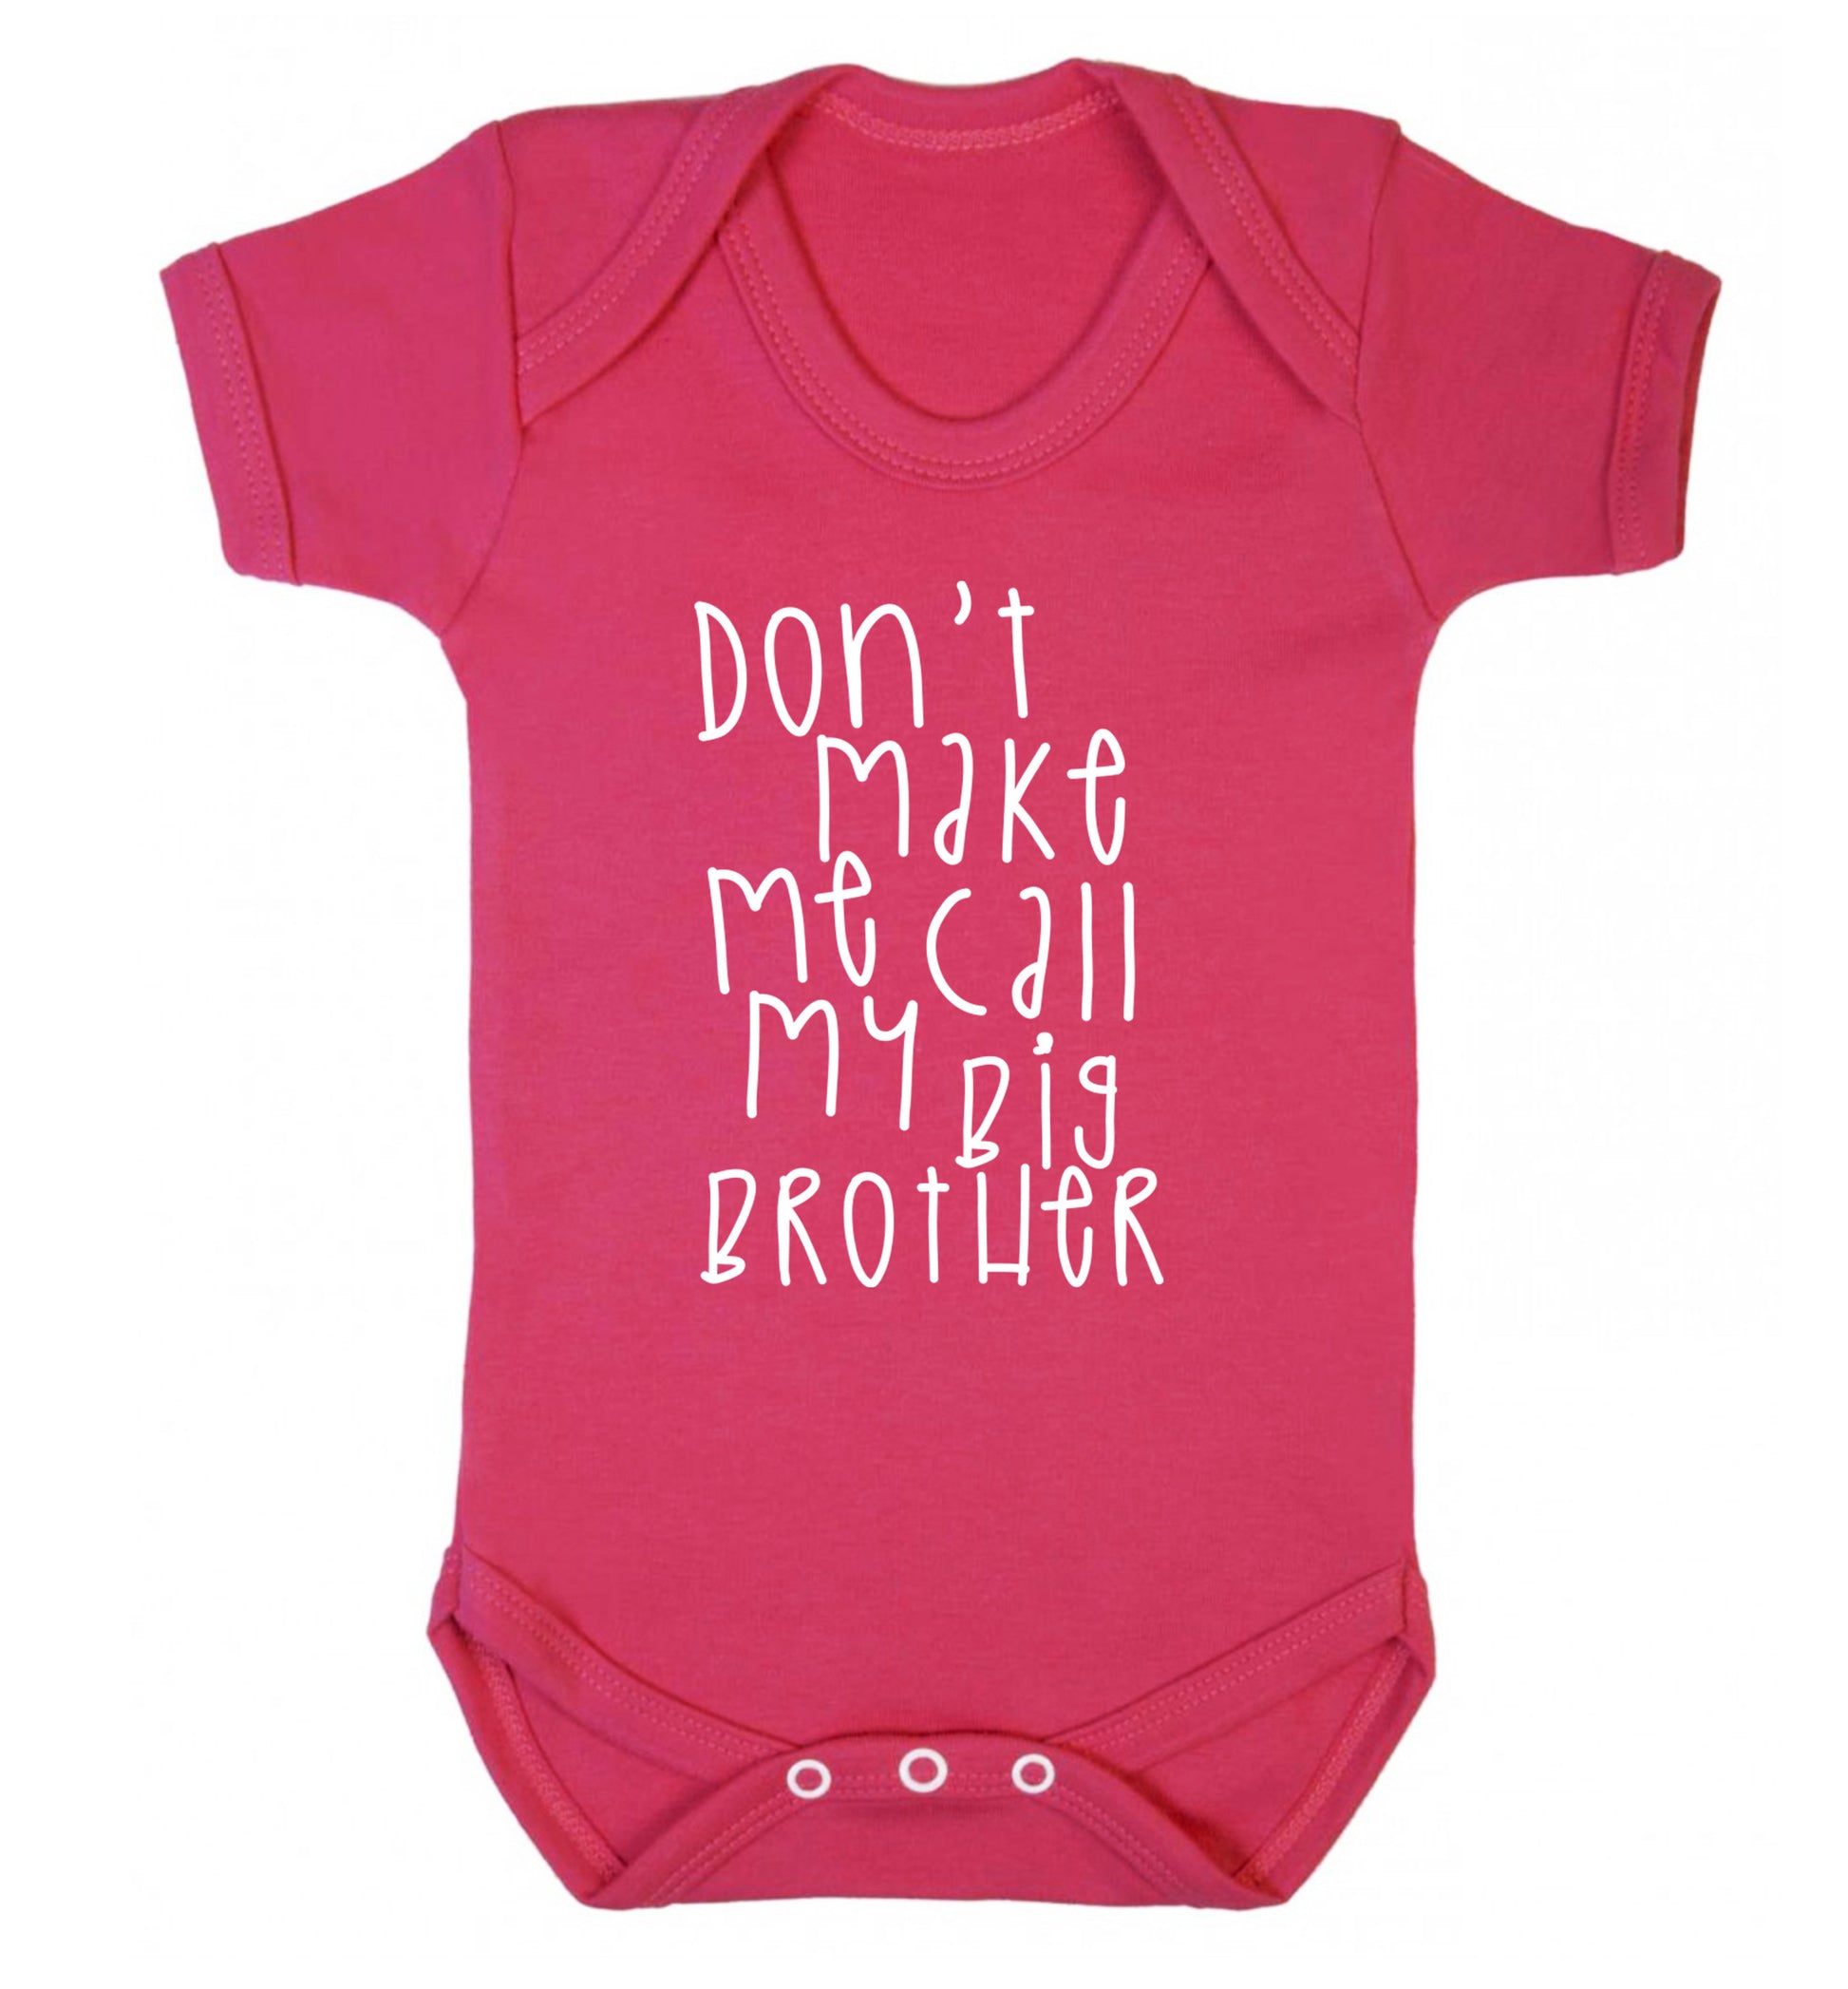 Don't make me call my big brother Baby Vest dark pink 18-24 months